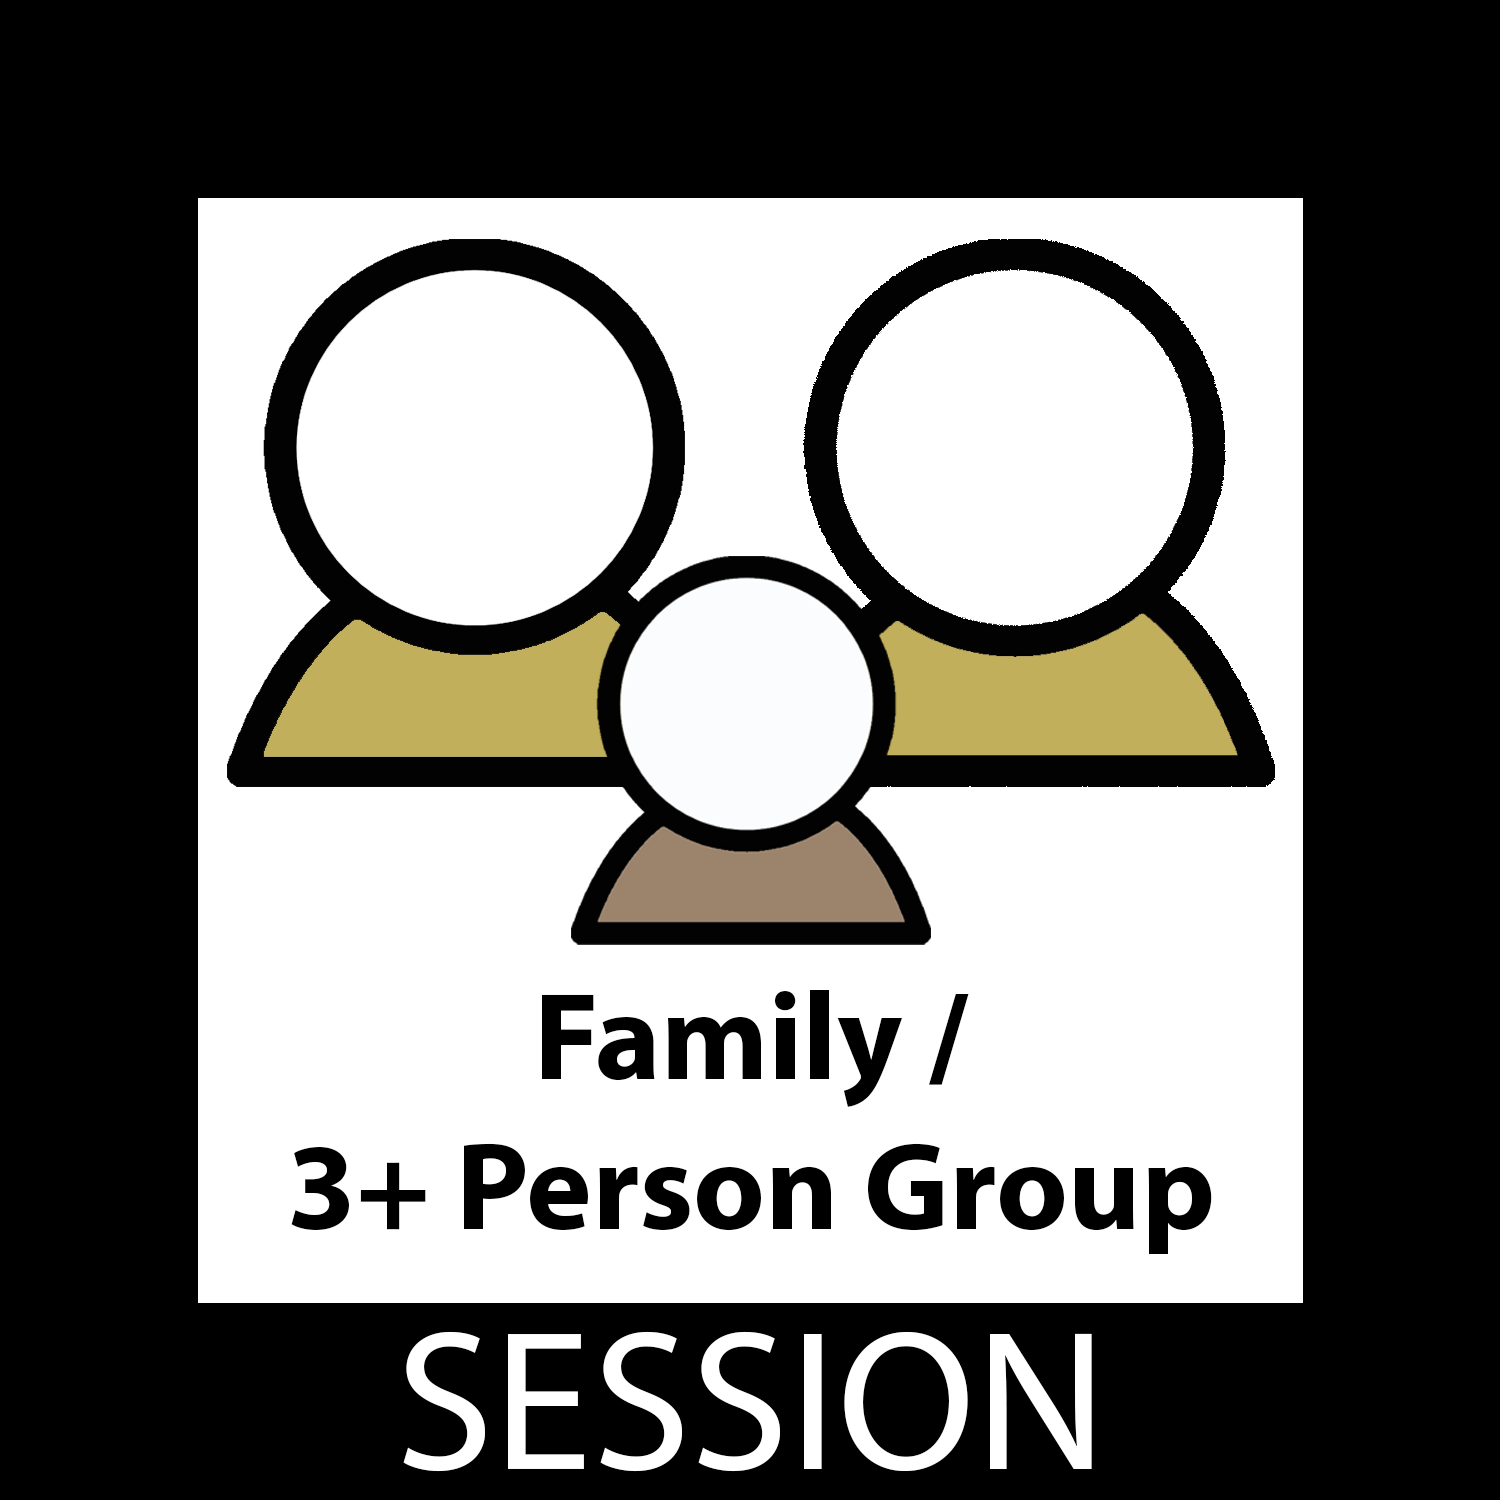 Family/Group 3+ Session